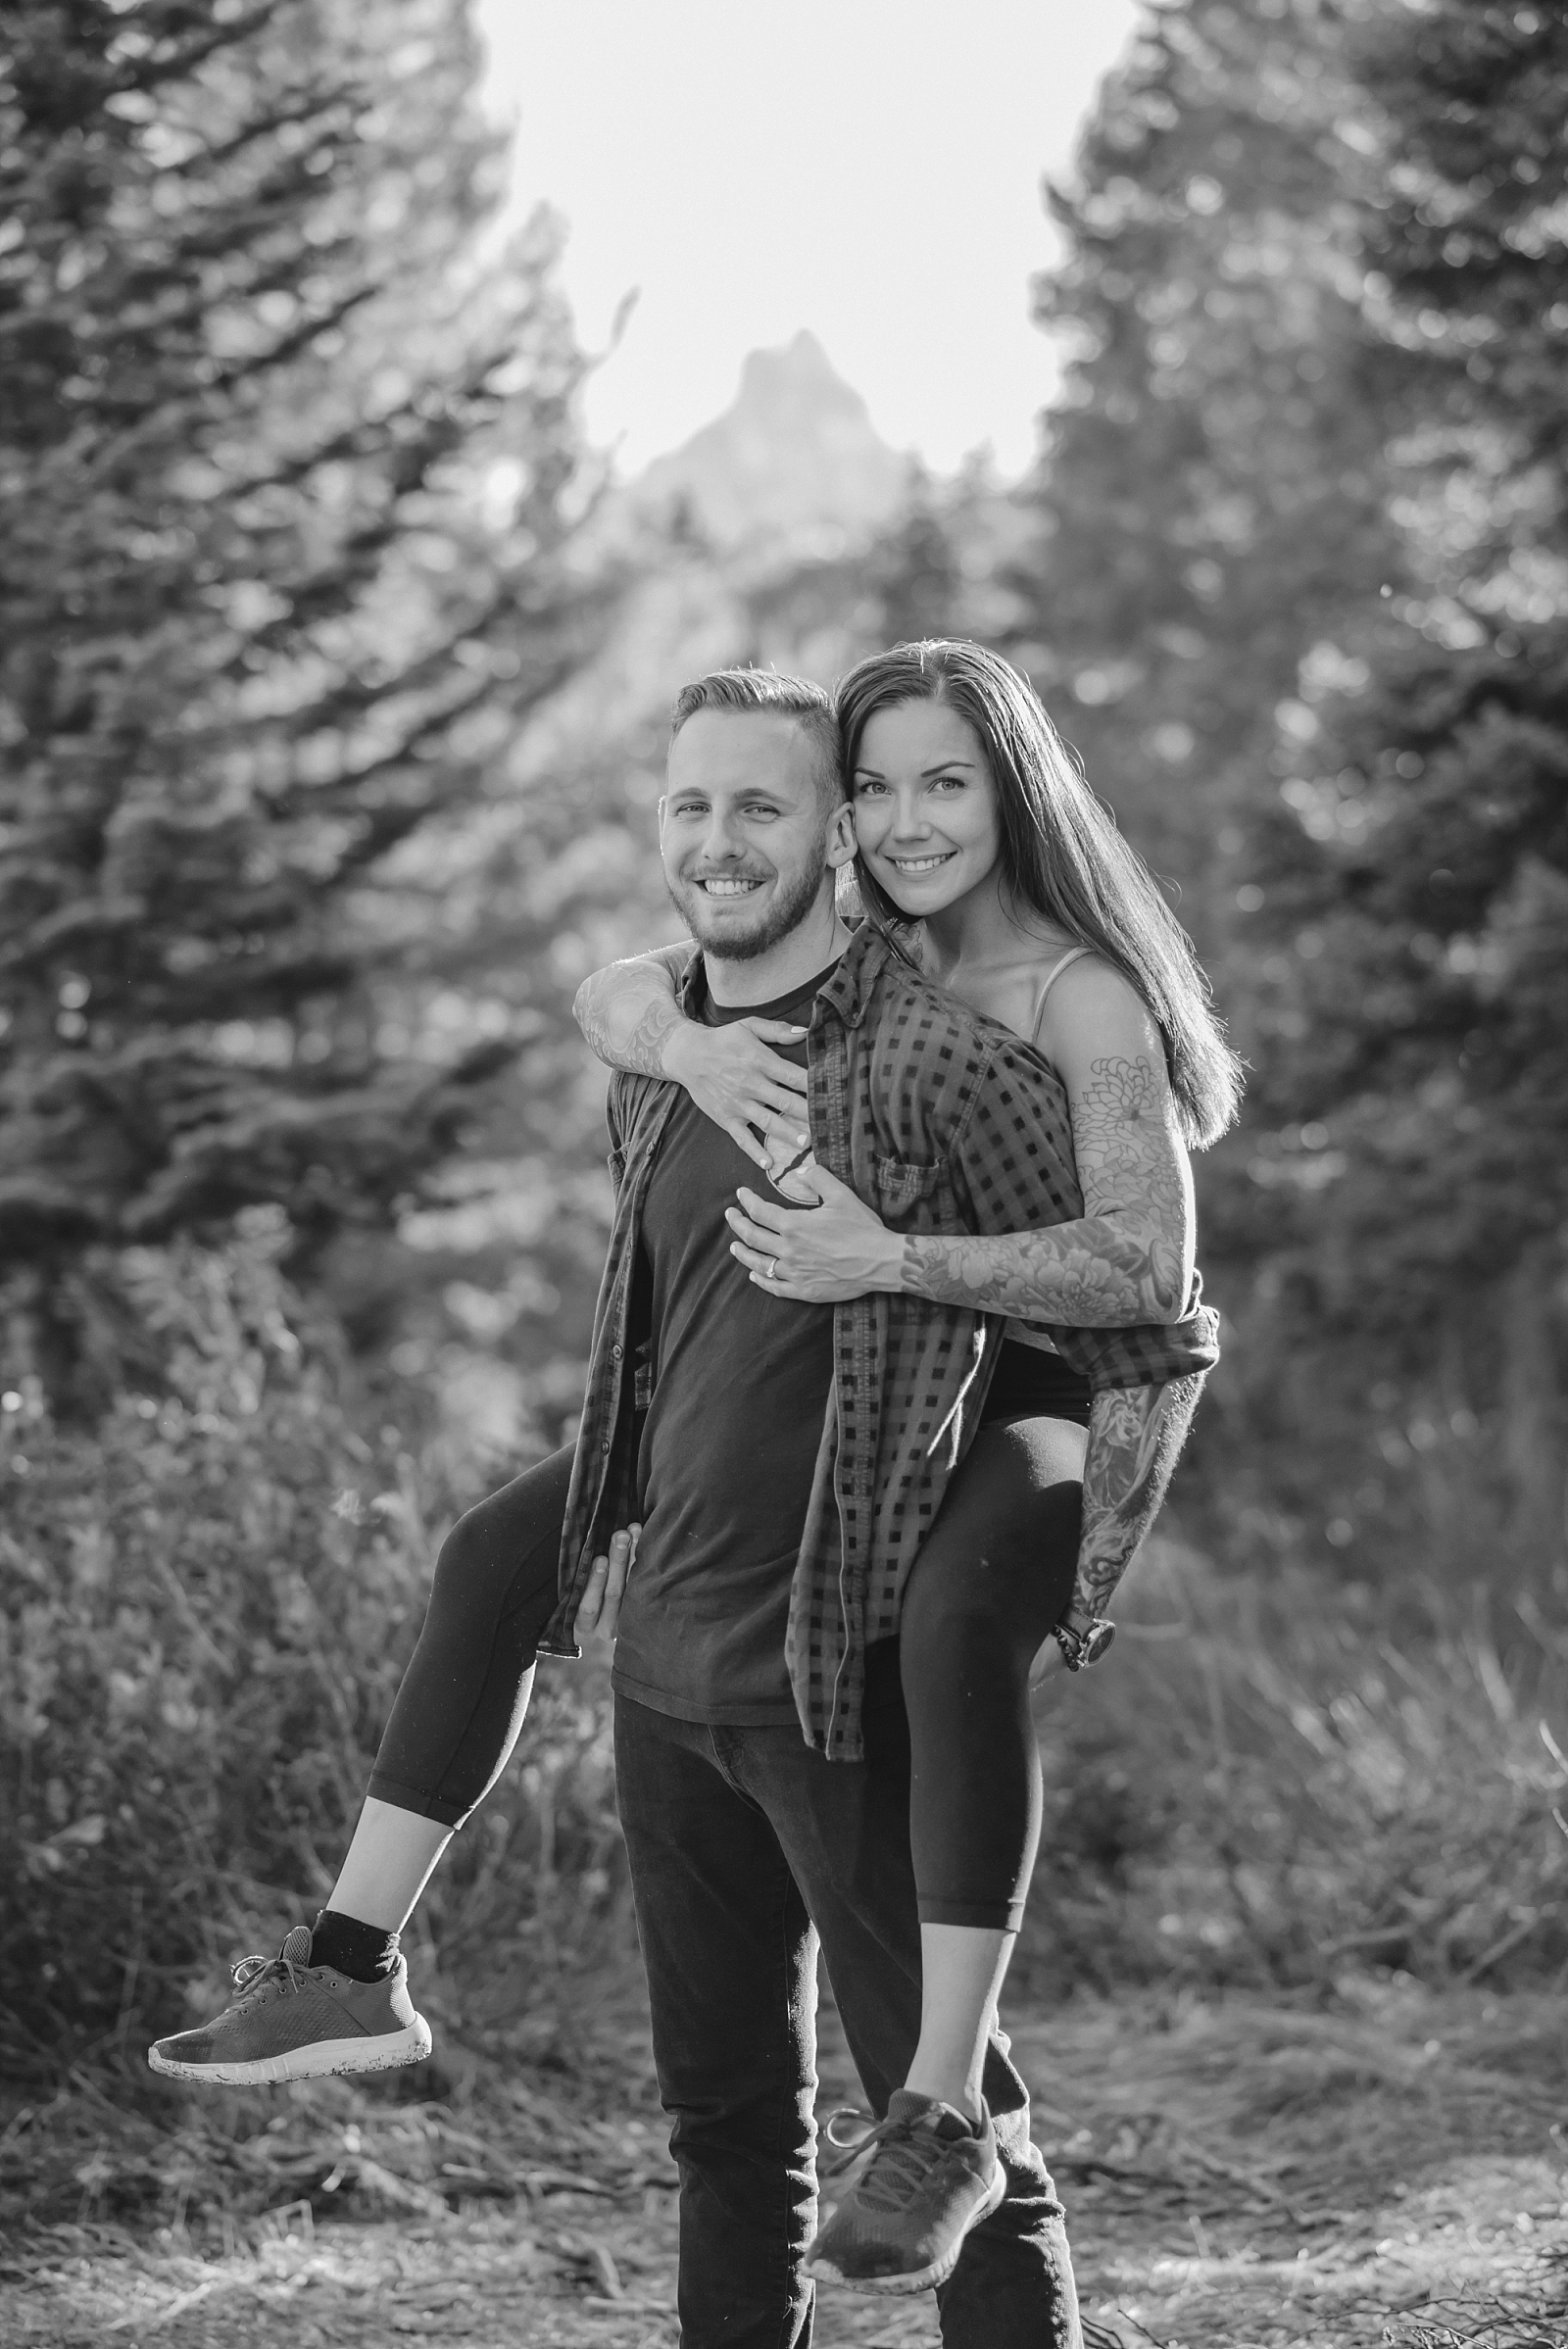 man gives woman a piggy back ride in engagement photos